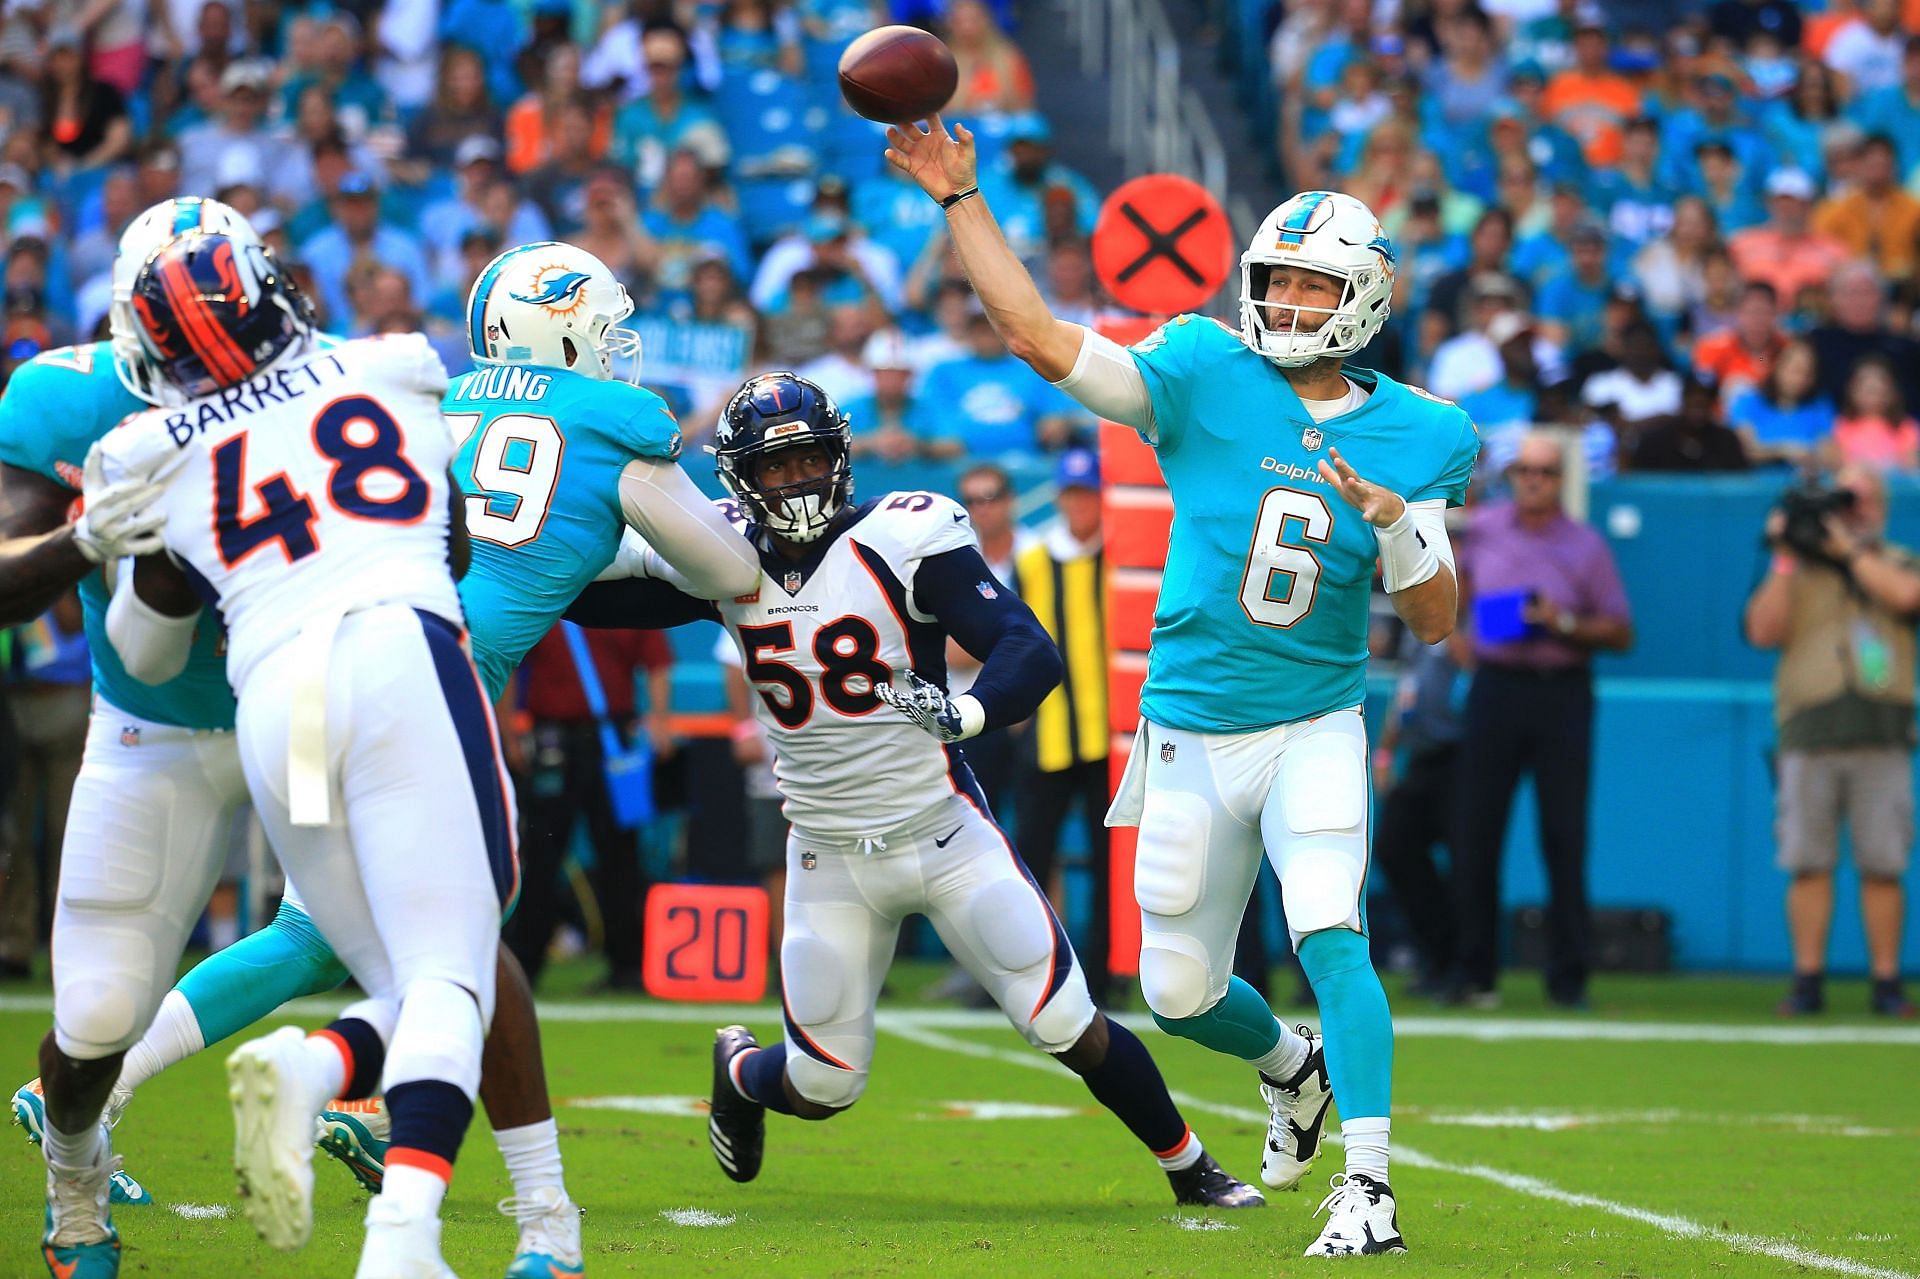 The QB with the Miami Dolphins facing his old team, the Denver Broncos